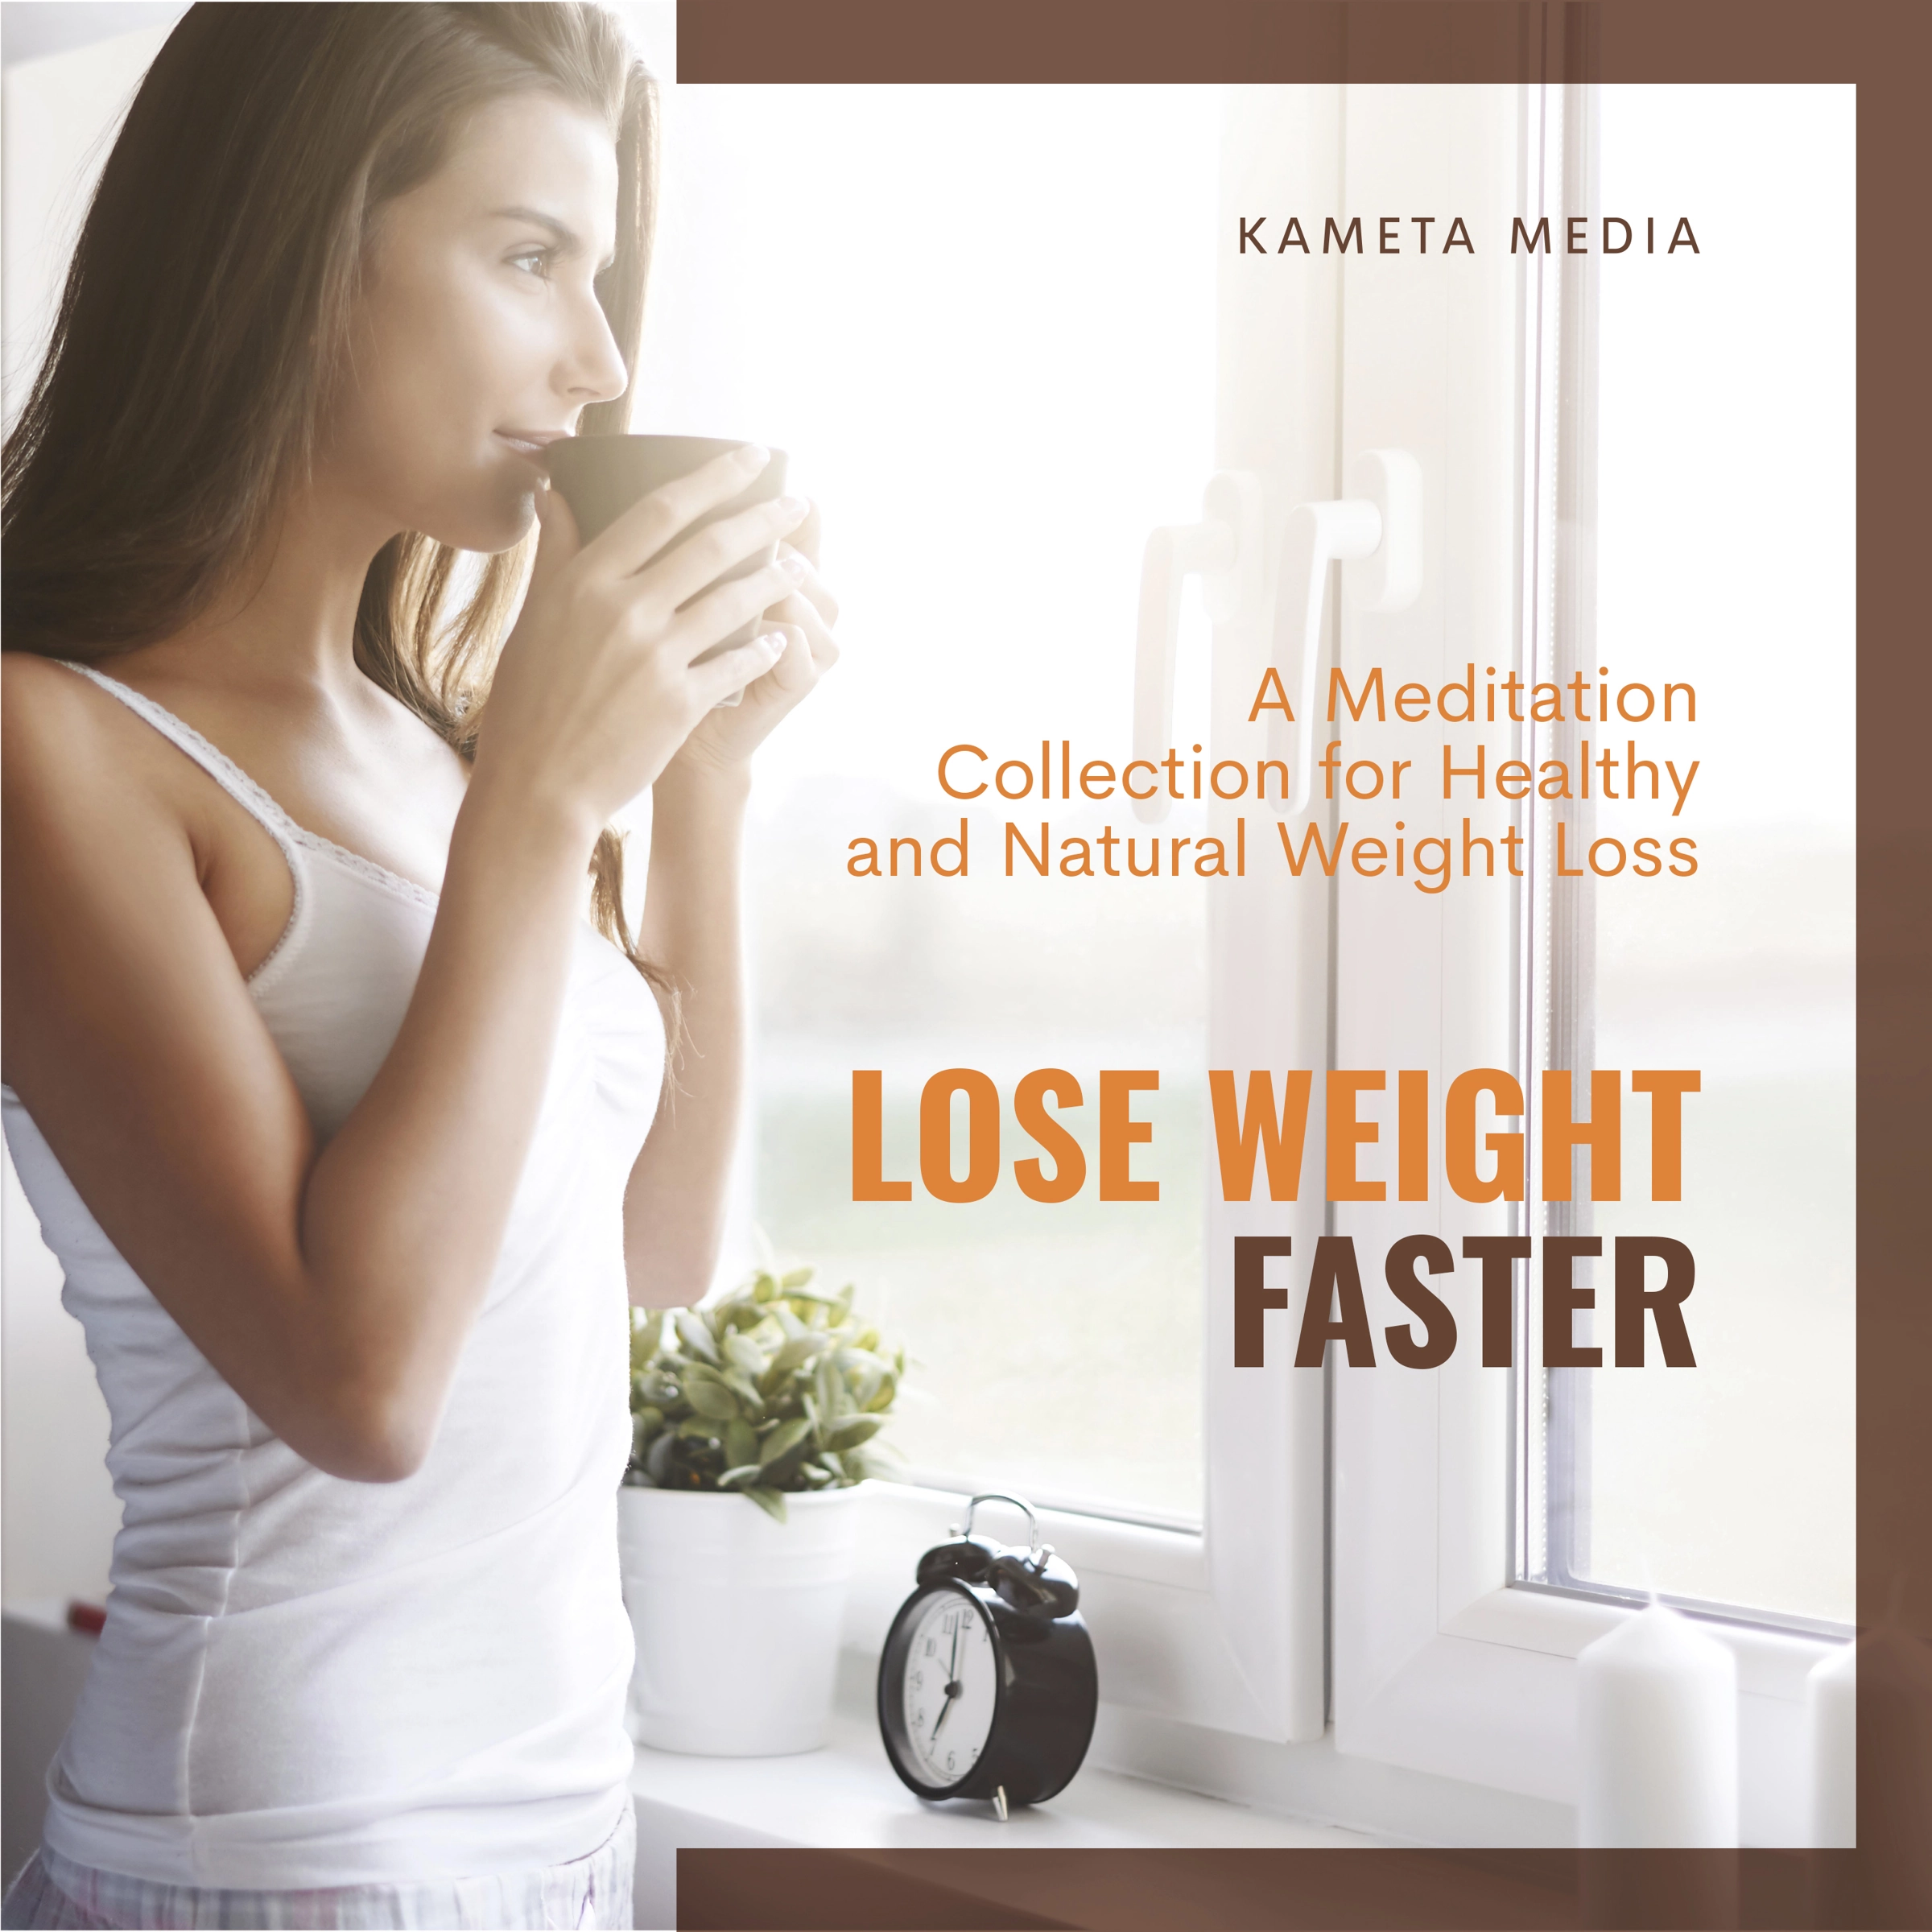 Lose Weight Faster: A Meditation Collection for Healthy and Natural Weight Loss Audiobook by Kameta Media